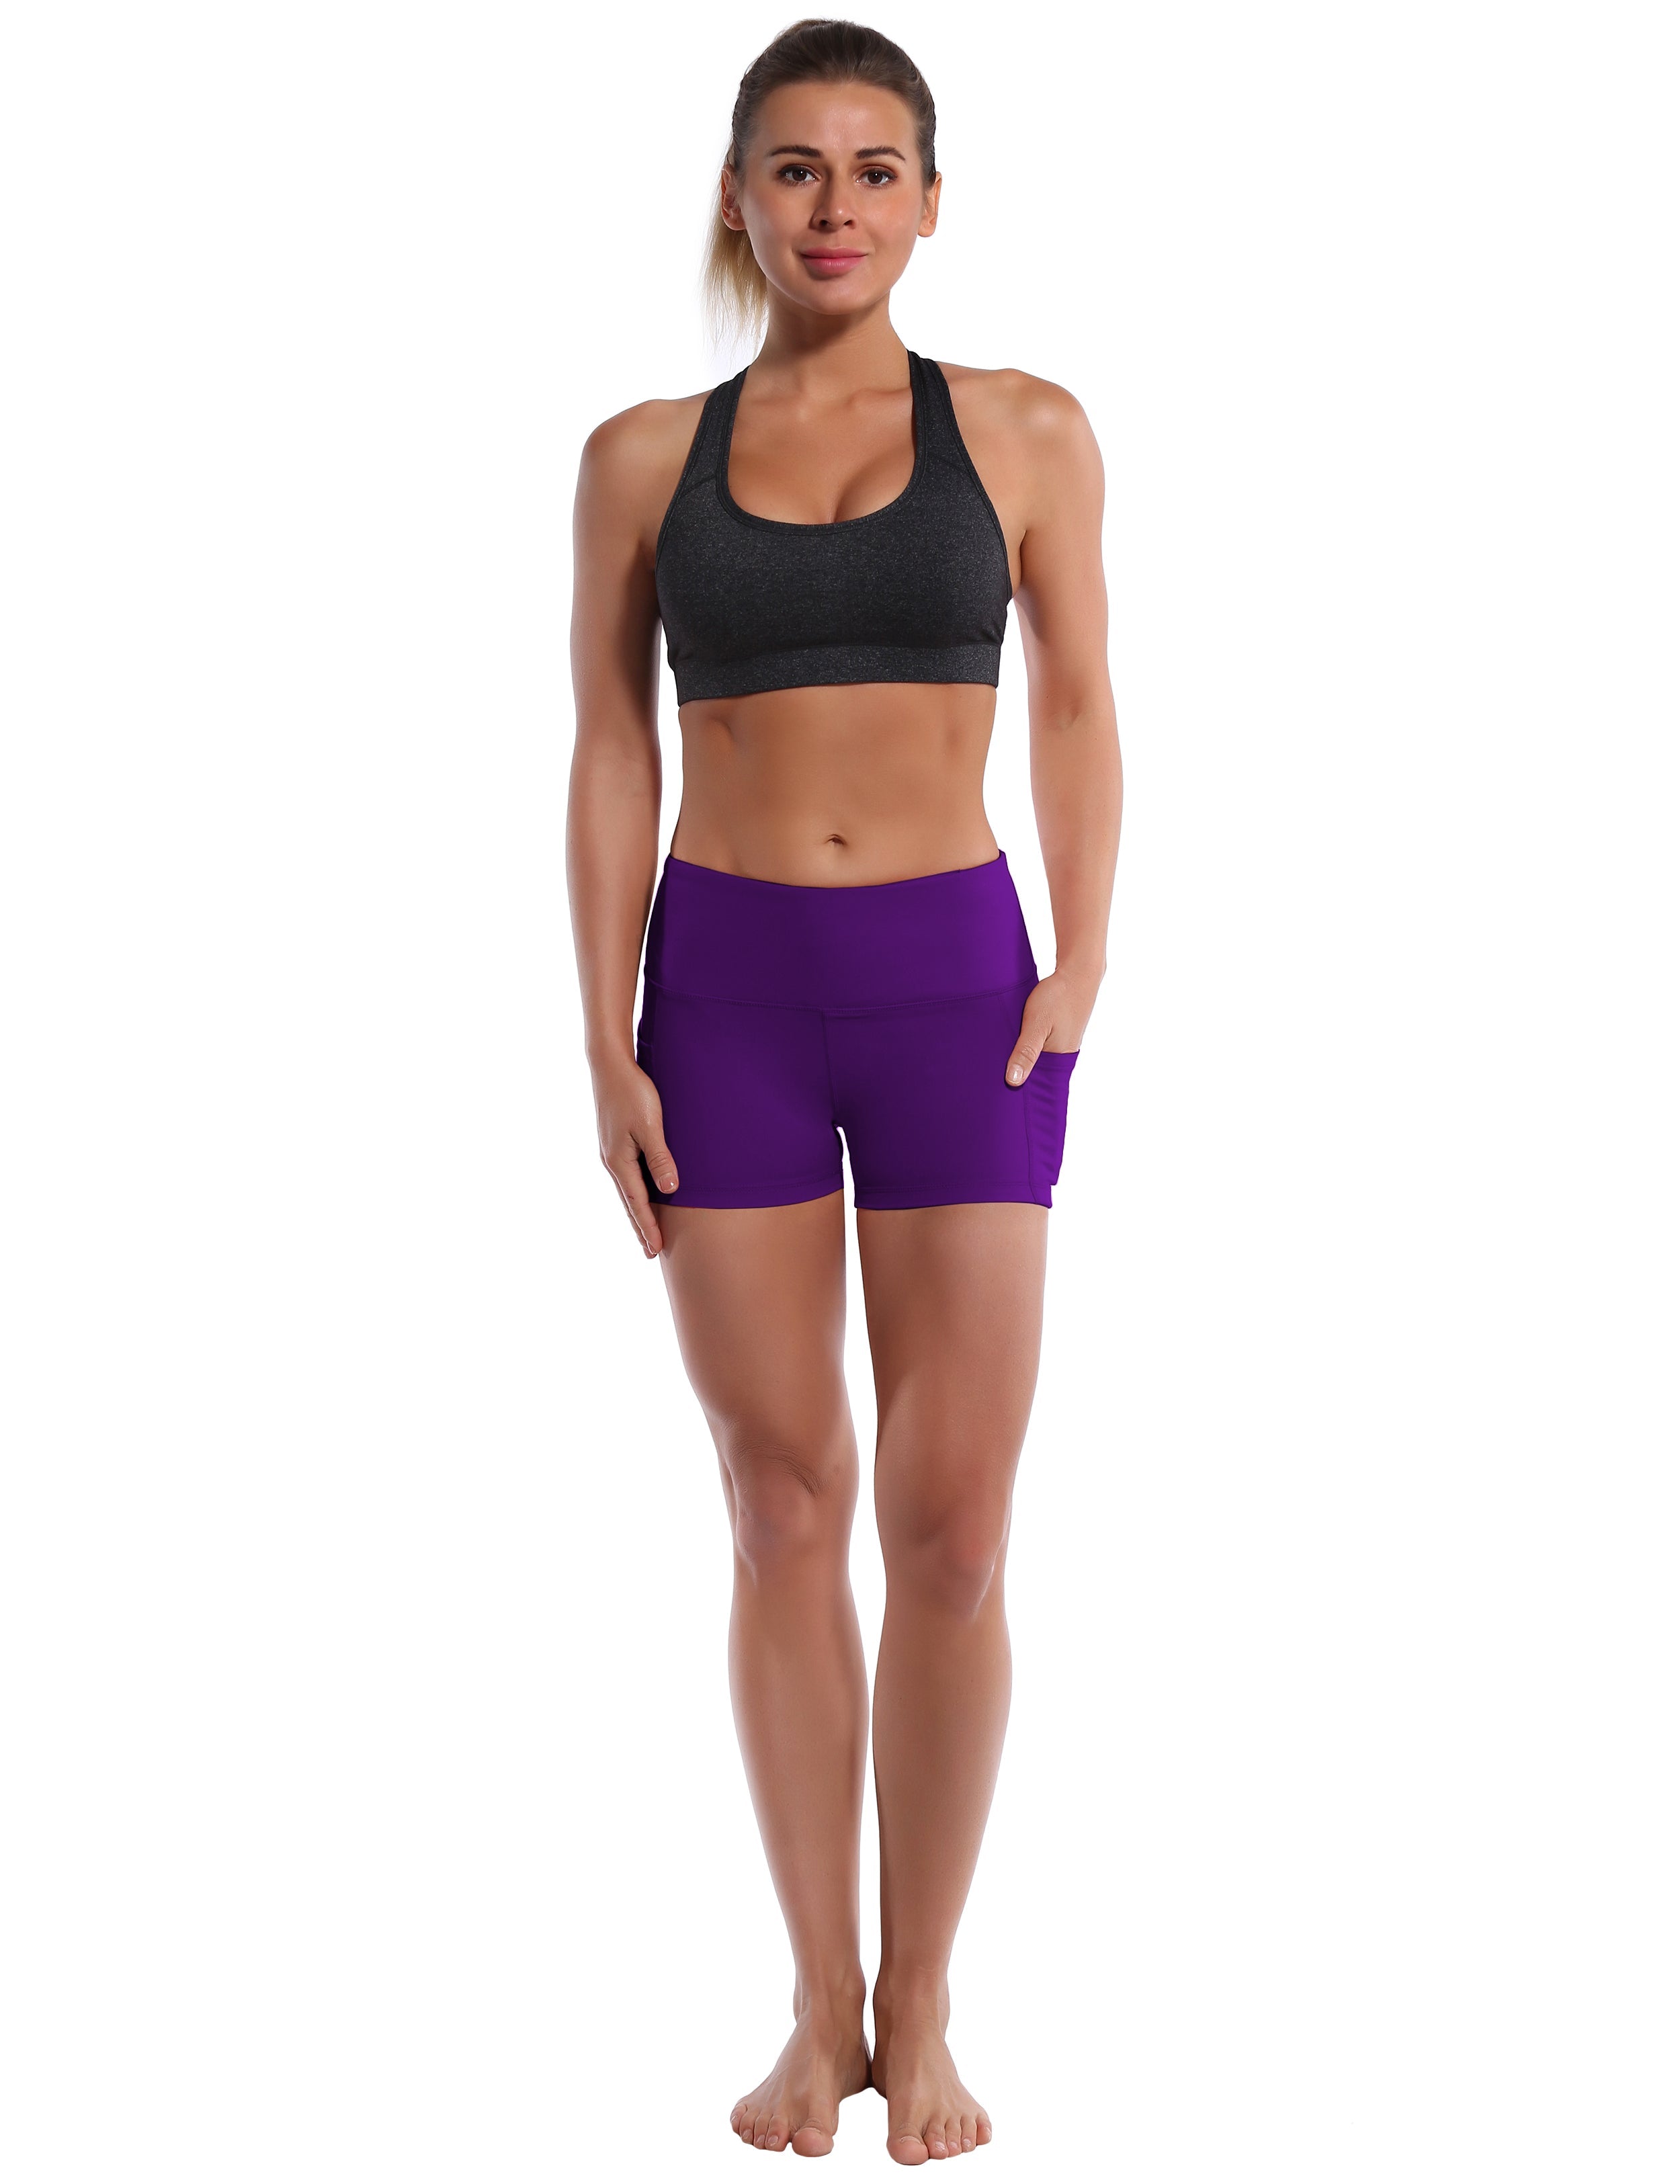 2.5" Side Pockets Running Shorts eggplantpurple Sleek, soft, smooth and totally comfortable: our newest sexy style is here. Softest-ever fabric High elasticity High density 4-way stretch Fabric doesn't attract lint easily No see-through Moisture-wicking Machine wash 78% Polyester, 22% Spandex